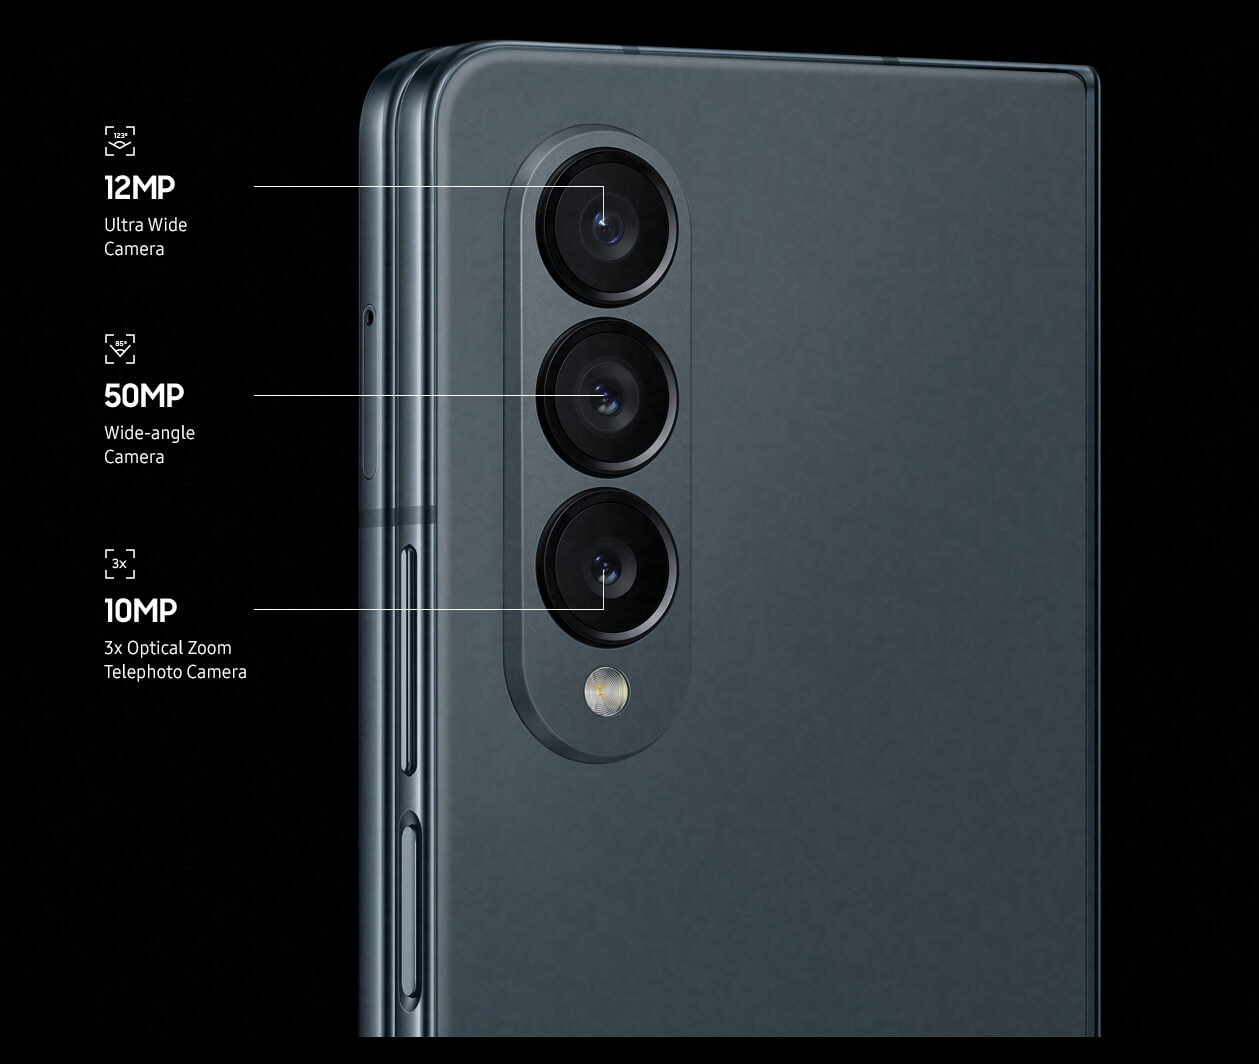 Showing 3 camera lenses on a Samsung Galaxy Z Fold4, with the multi-camera system. One is a 12MP Ultrawide camera, one is a 50MP Wide angle camera, and one is a 10MP 3-times optical zoom telephoto camera.